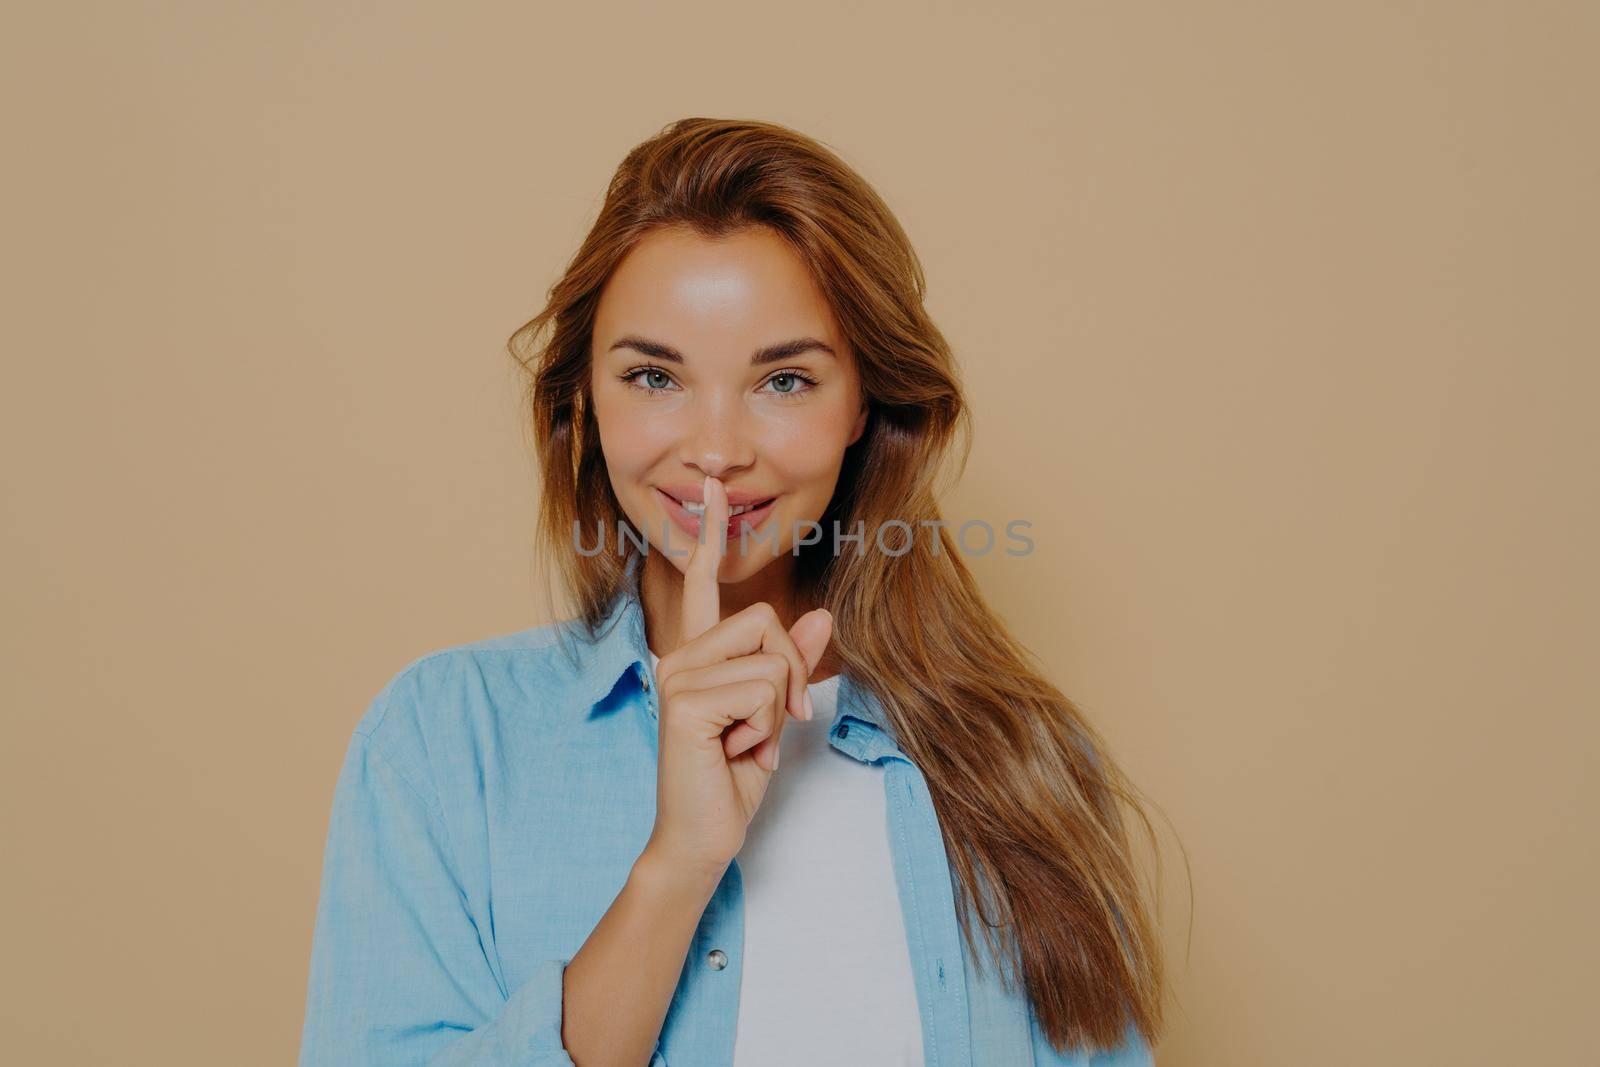 Portrait of joyful smiling female with long light brown hair by vkstock